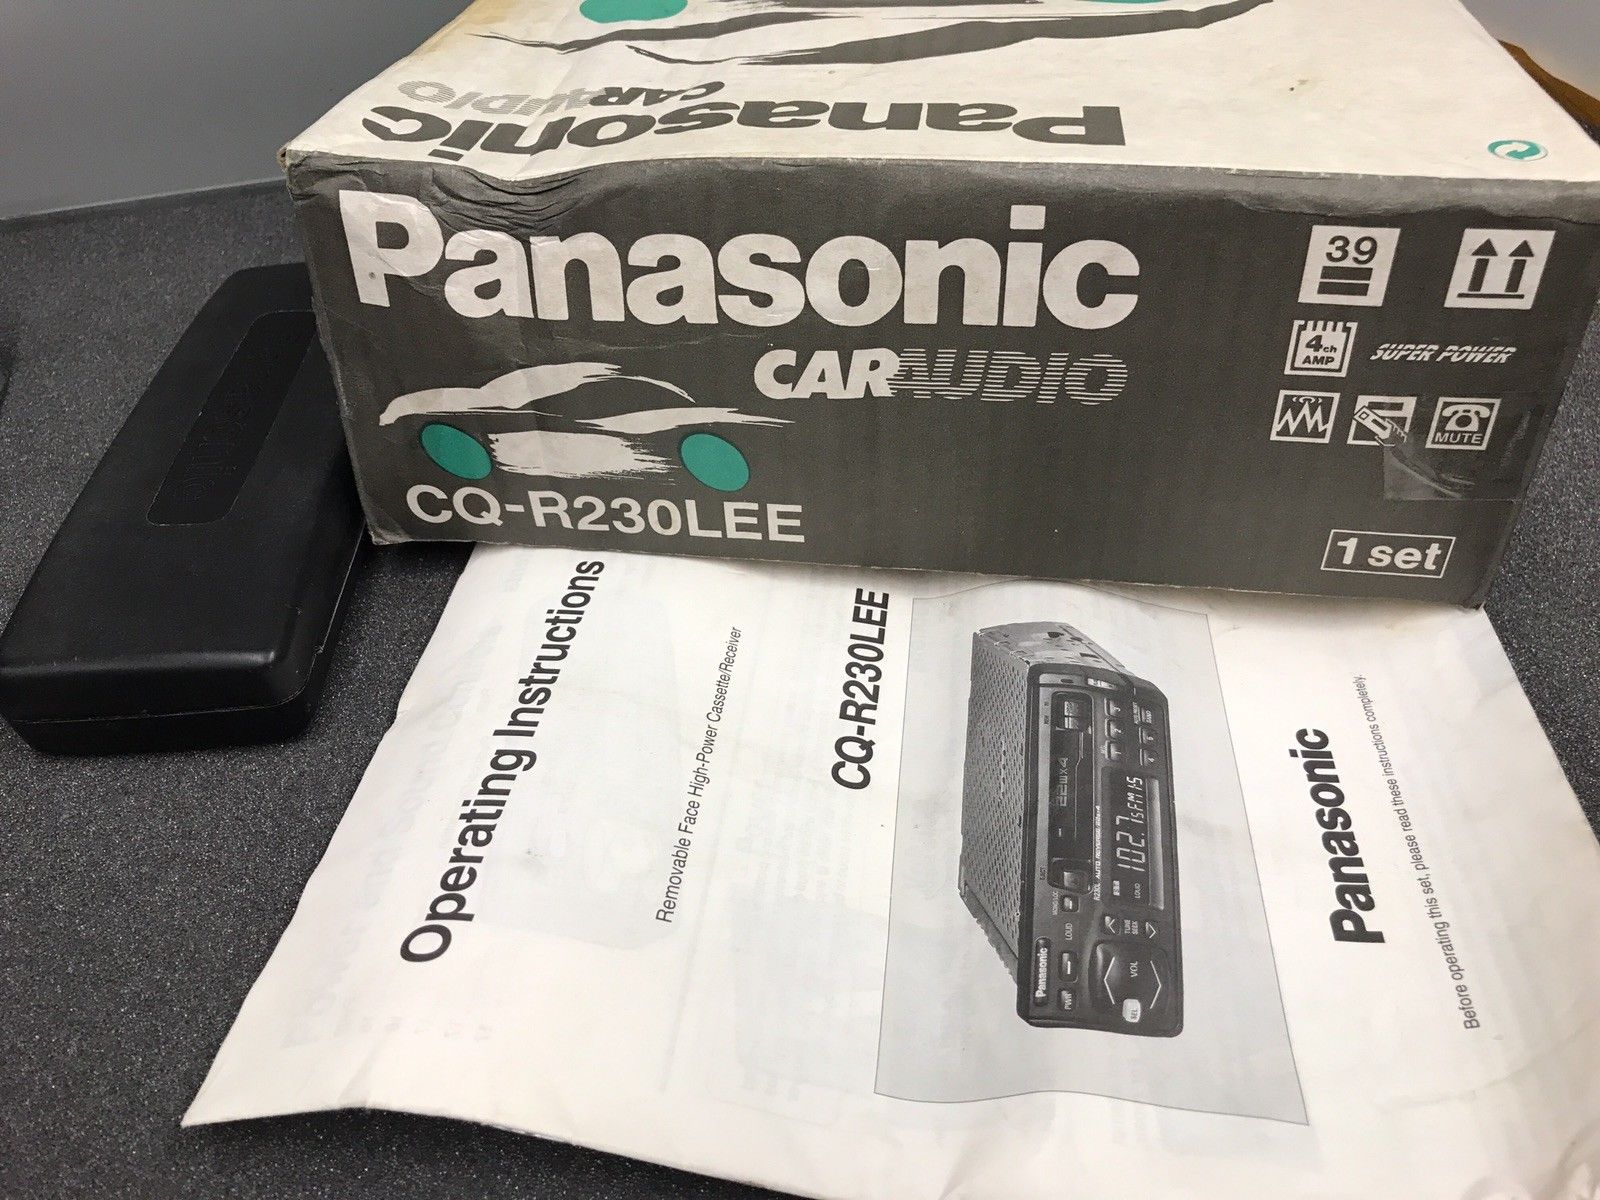 Old Classic Panasonic Car Radio Stereo Cassette Player Model Cq-R230Lee Boxed